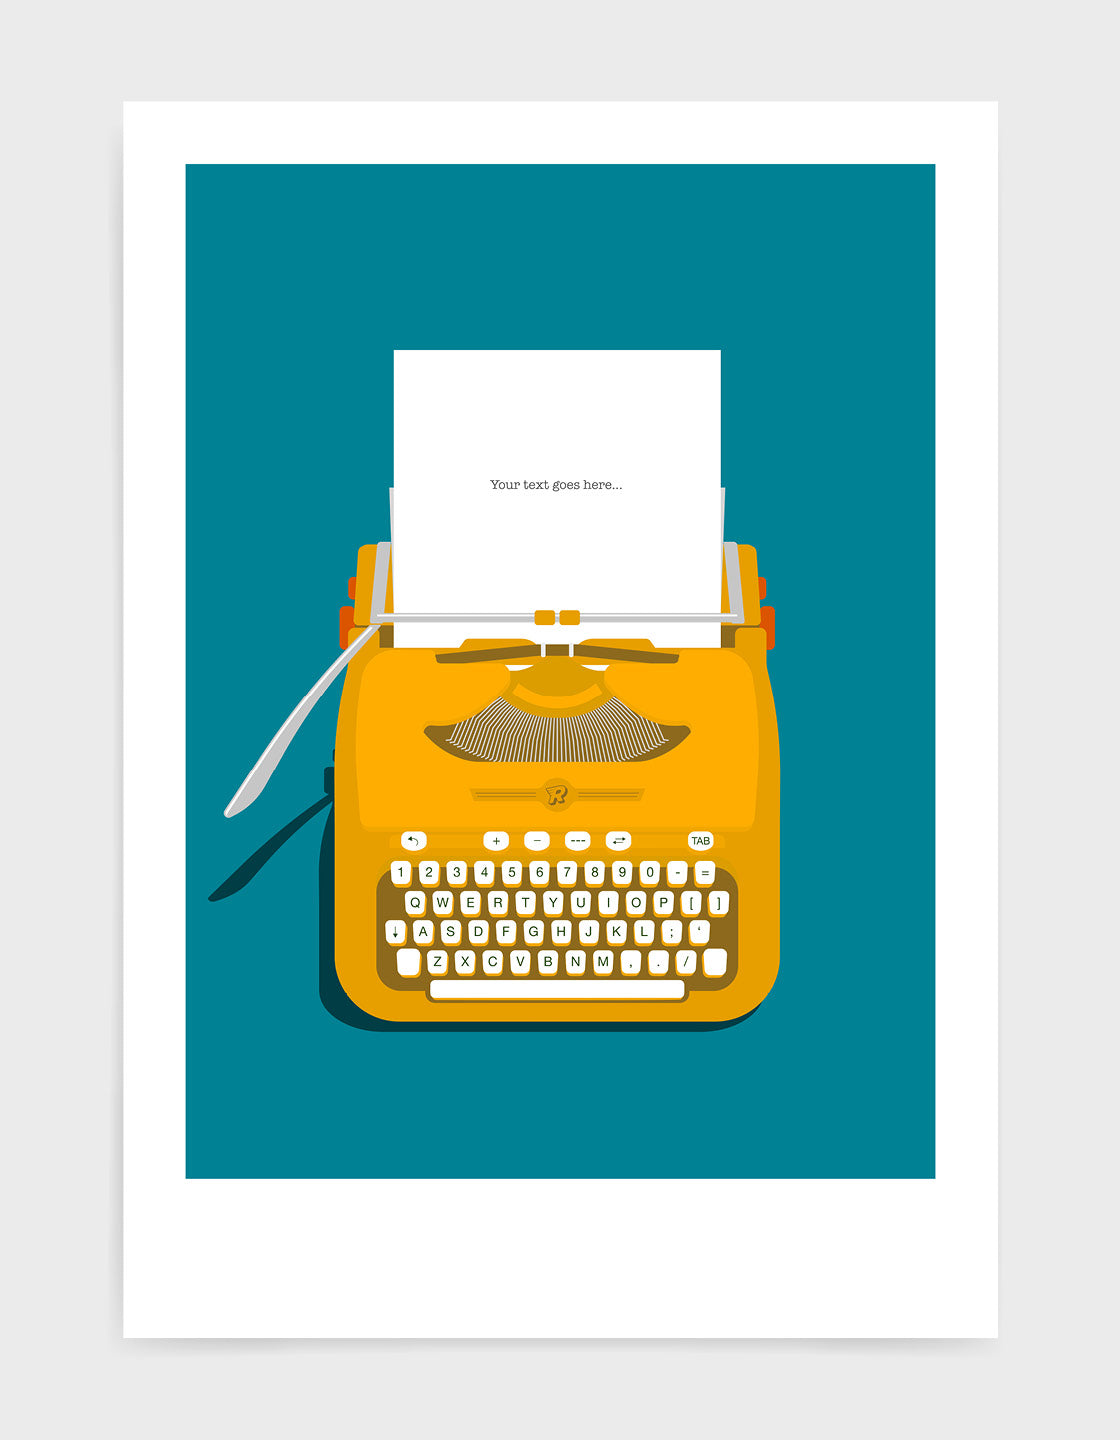 Art print showing a retro vintage typewriter in yellow with paper in the top and space to personalise the text. Set against a bright blue background